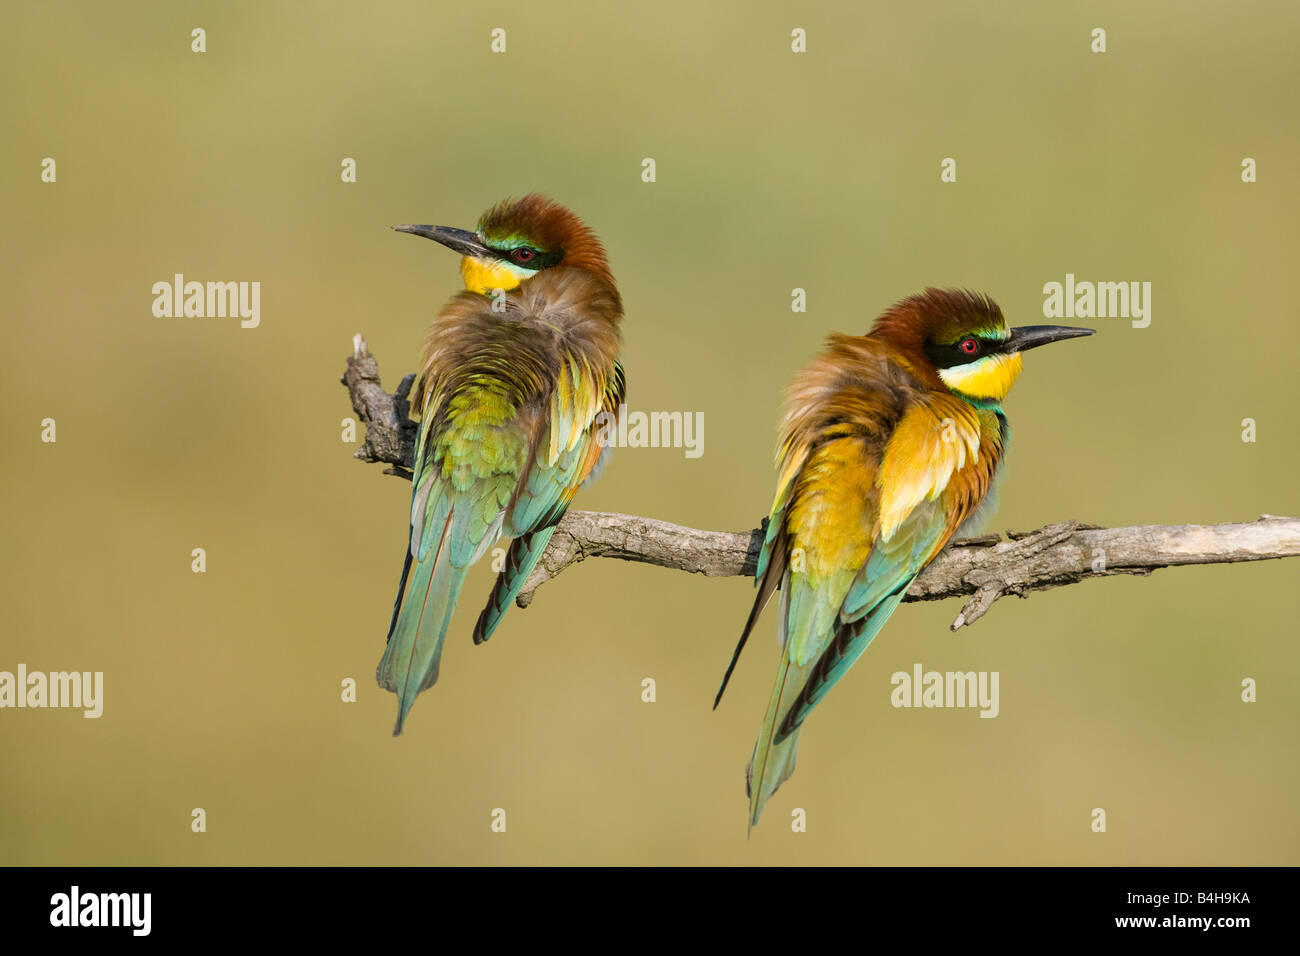 Close-up of two European Bee-eaters (Merops apiaster) perching on branch, Hungary Stock Photo